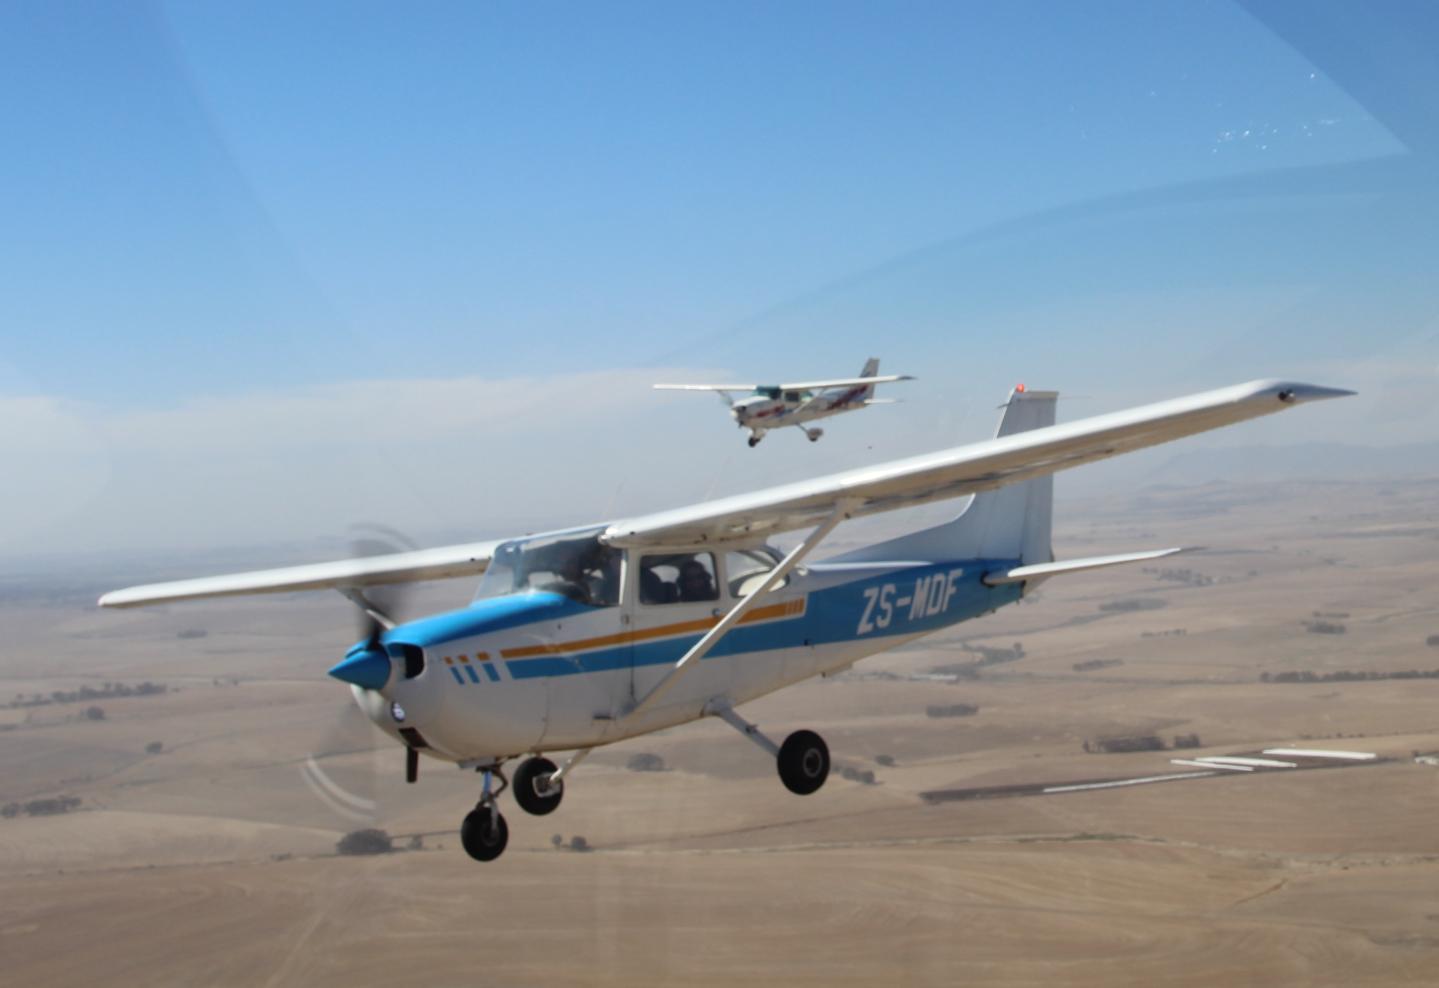 What Are the Different Models of Cessna Aircraft?